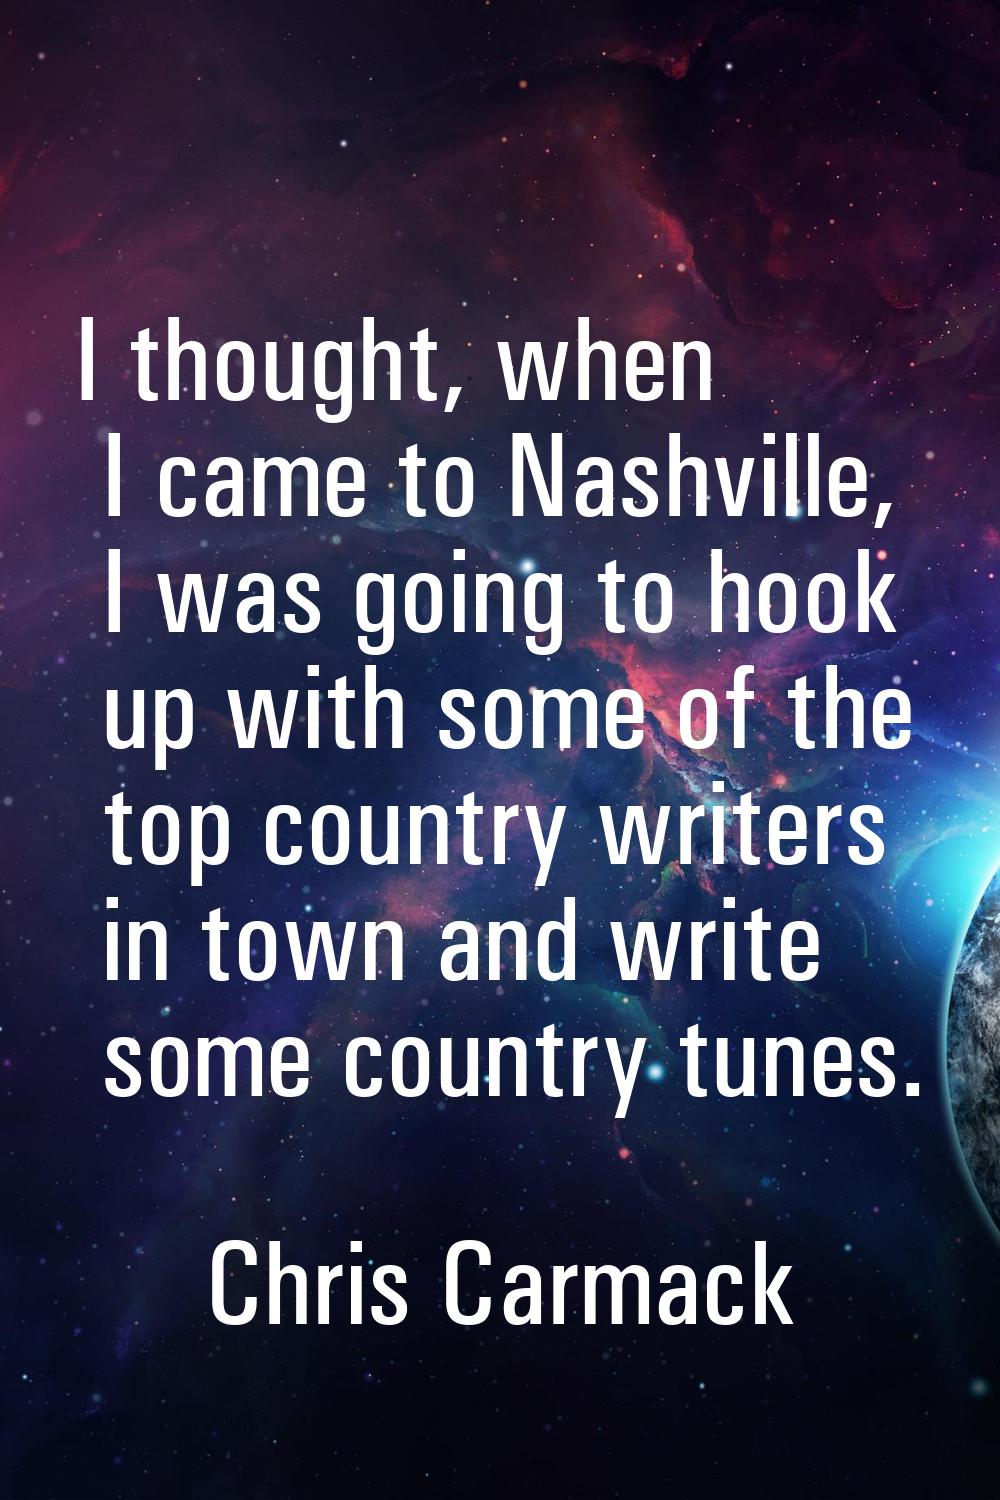 I thought, when I came to Nashville, I was going to hook up with some of the top country writers in